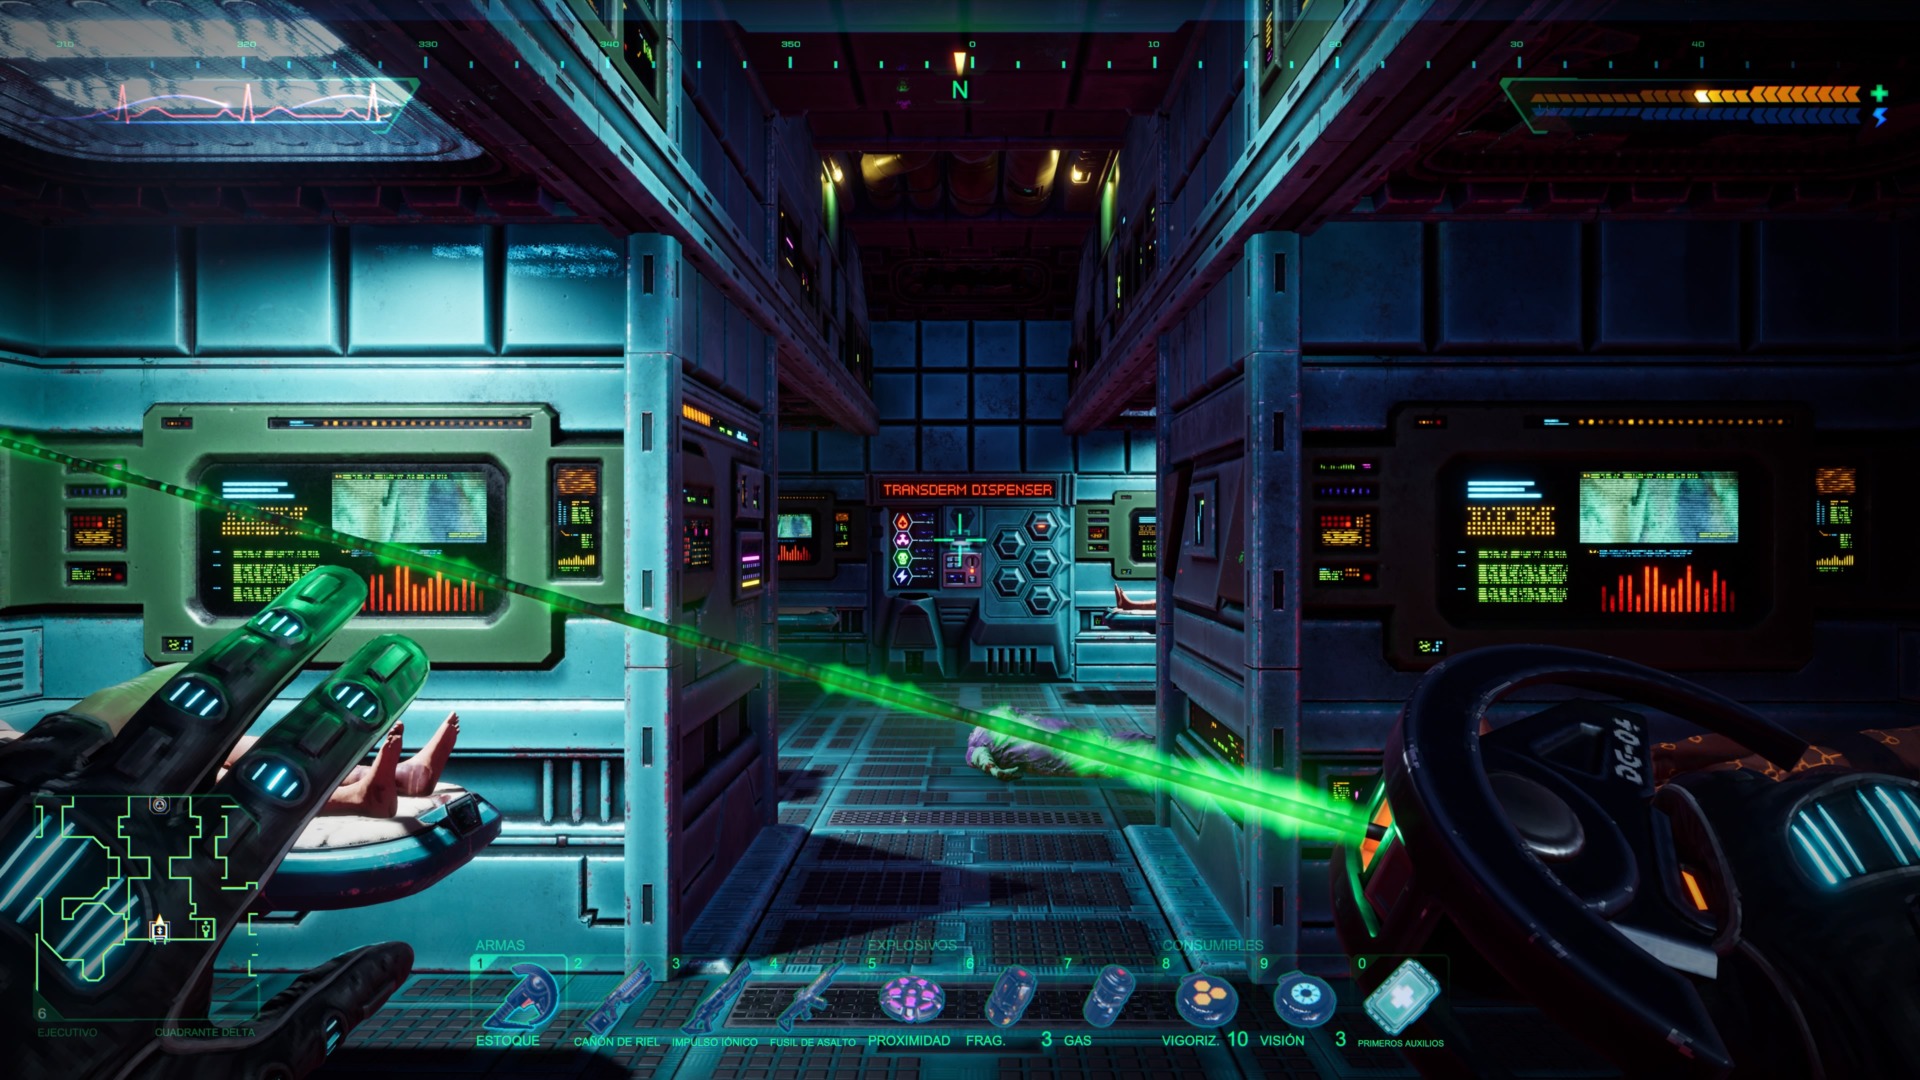 System Shock Review